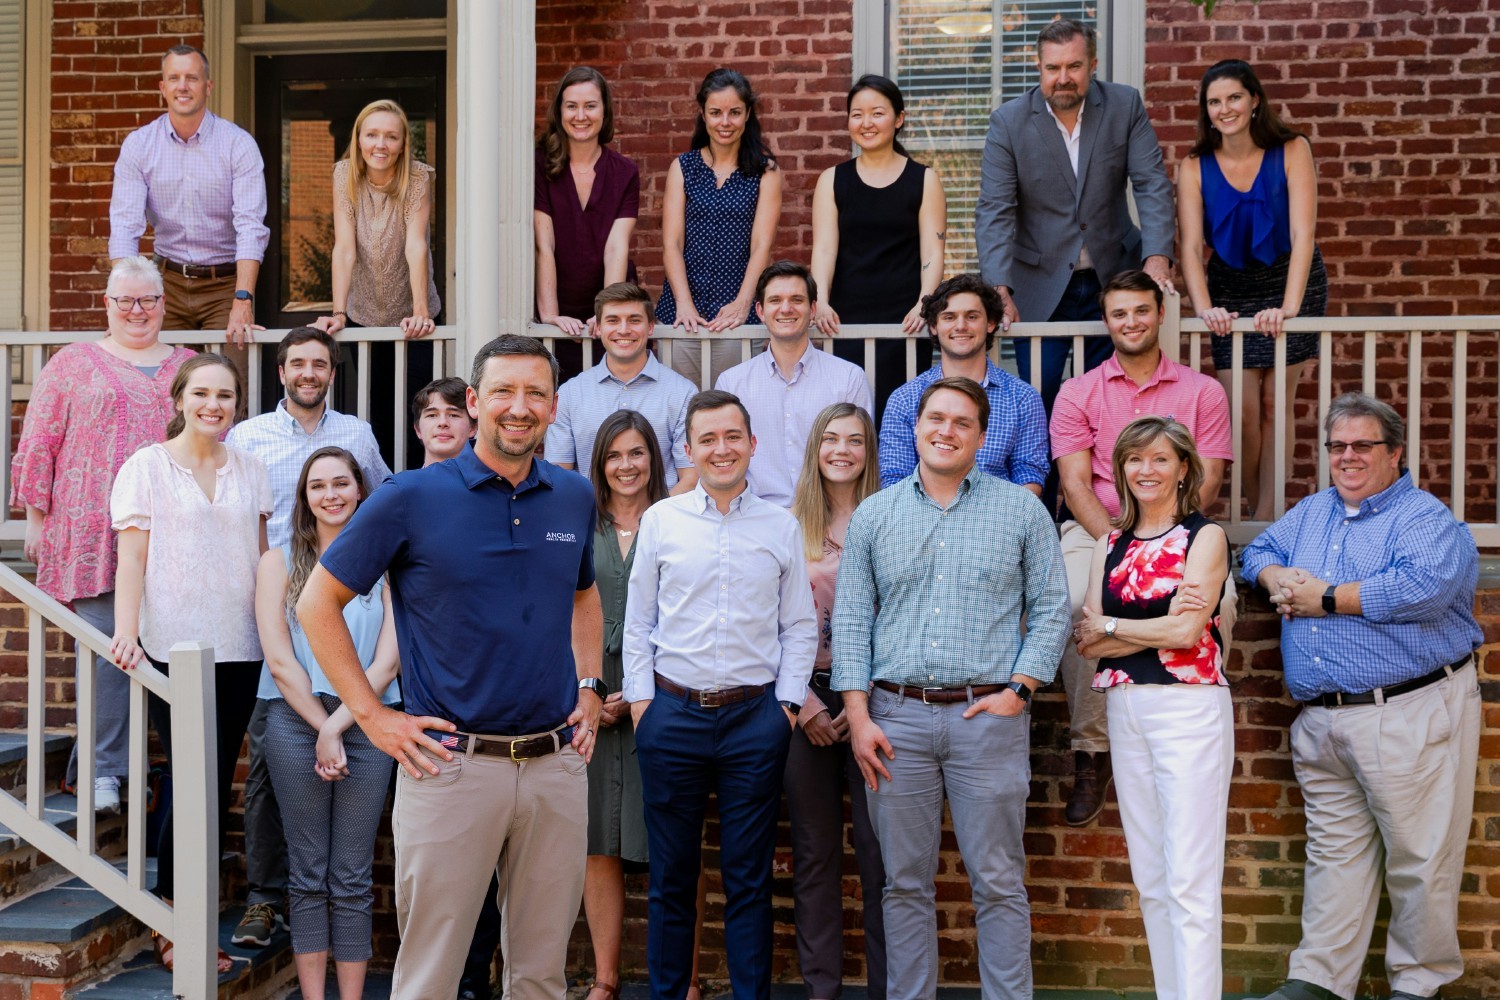 Ben Ochs, Chief Executive Officer & Managing Partner, with the team outside of our headquarters in Charlottesville, VA.